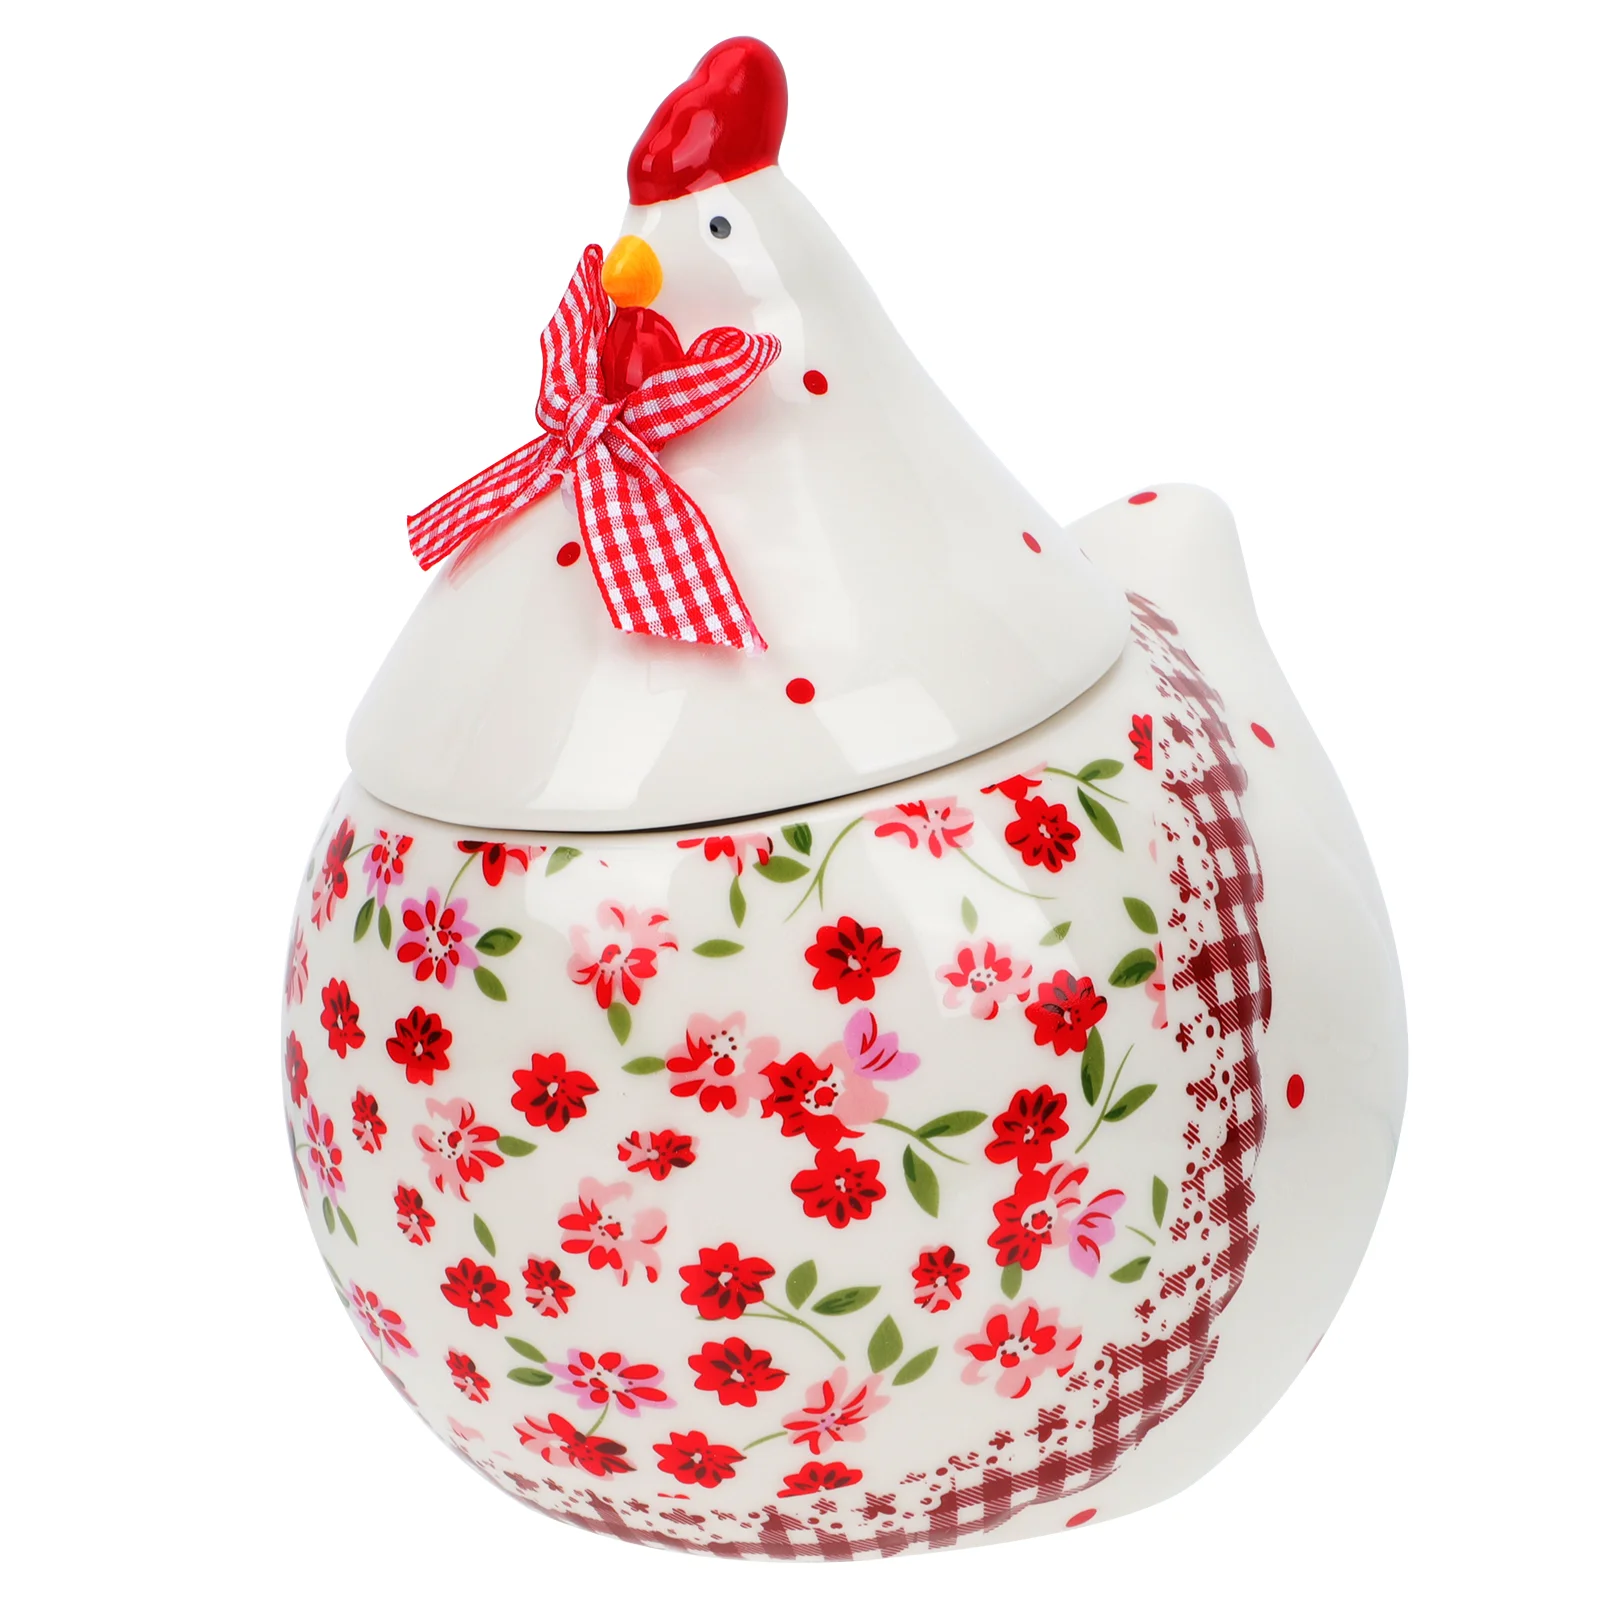 

Jar Ceramic Storage Canister Container Eastercookie Candy Kitchen Egg Tea Hen Coffee Porcelain Airtight Chicken Lid Holder